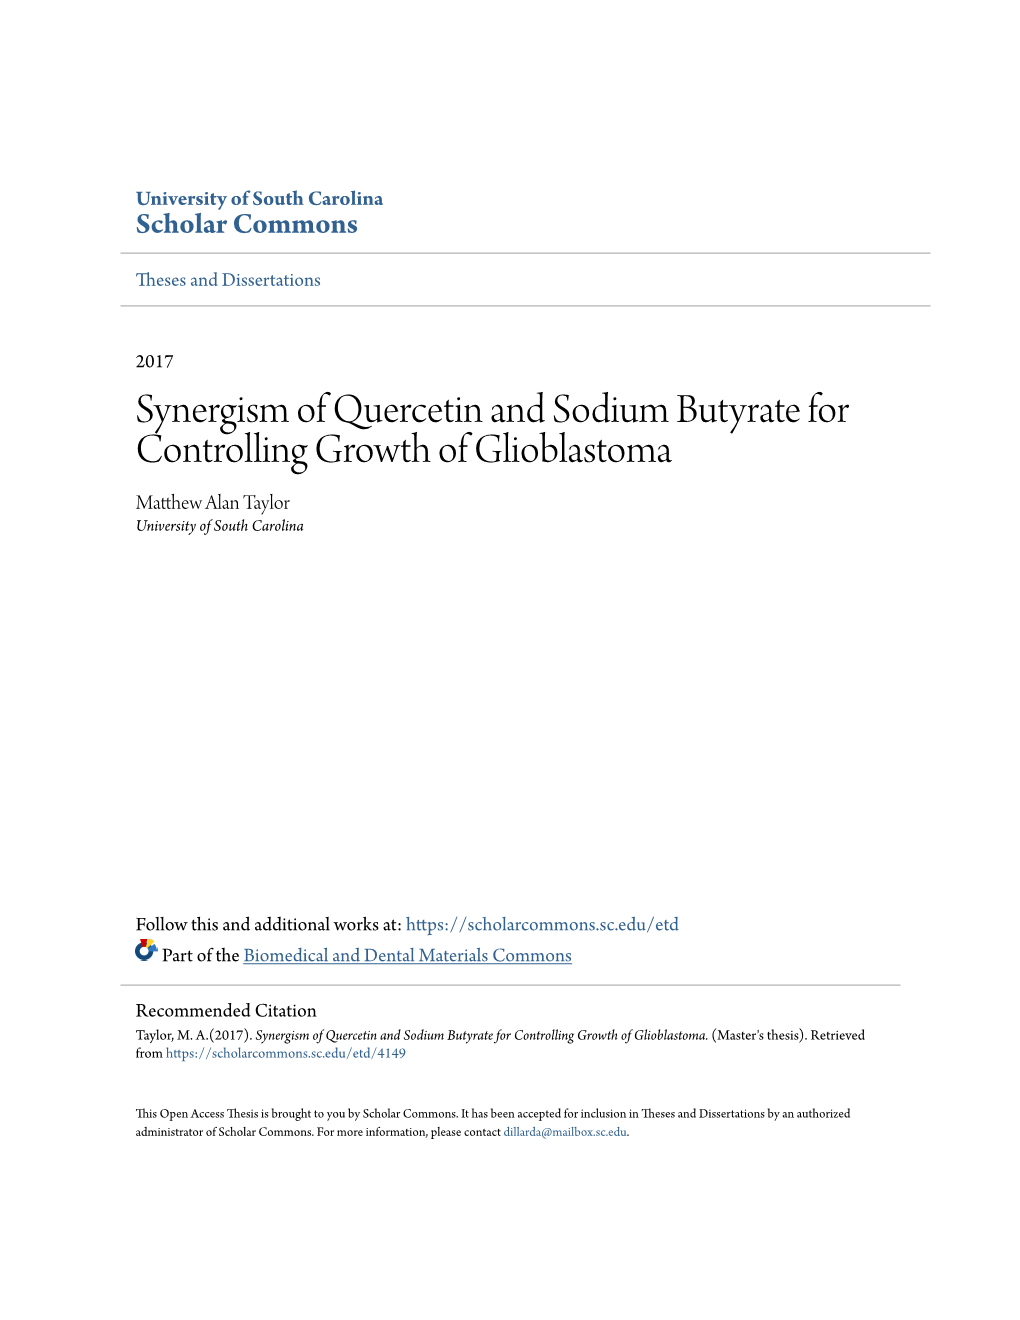 Synergism of Quercetin and Sodium Butyrate for Controlling Growth of Glioblastoma Matthew Alan Taylor University of South Carolina